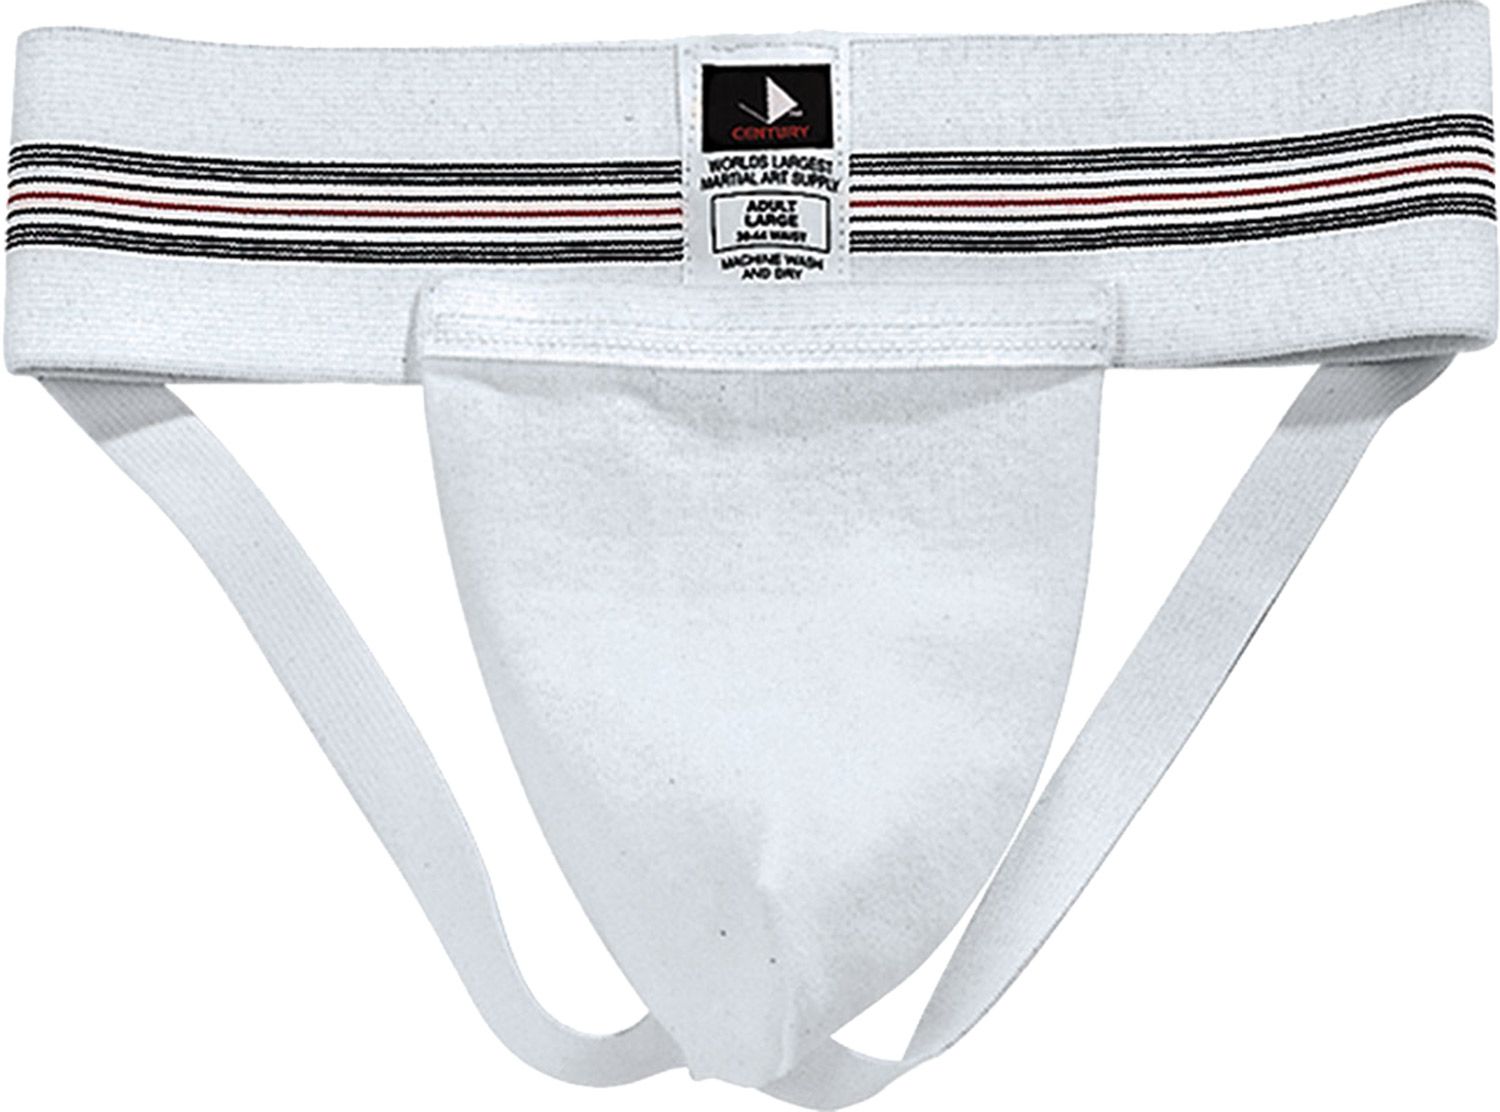 soft athletic supporter